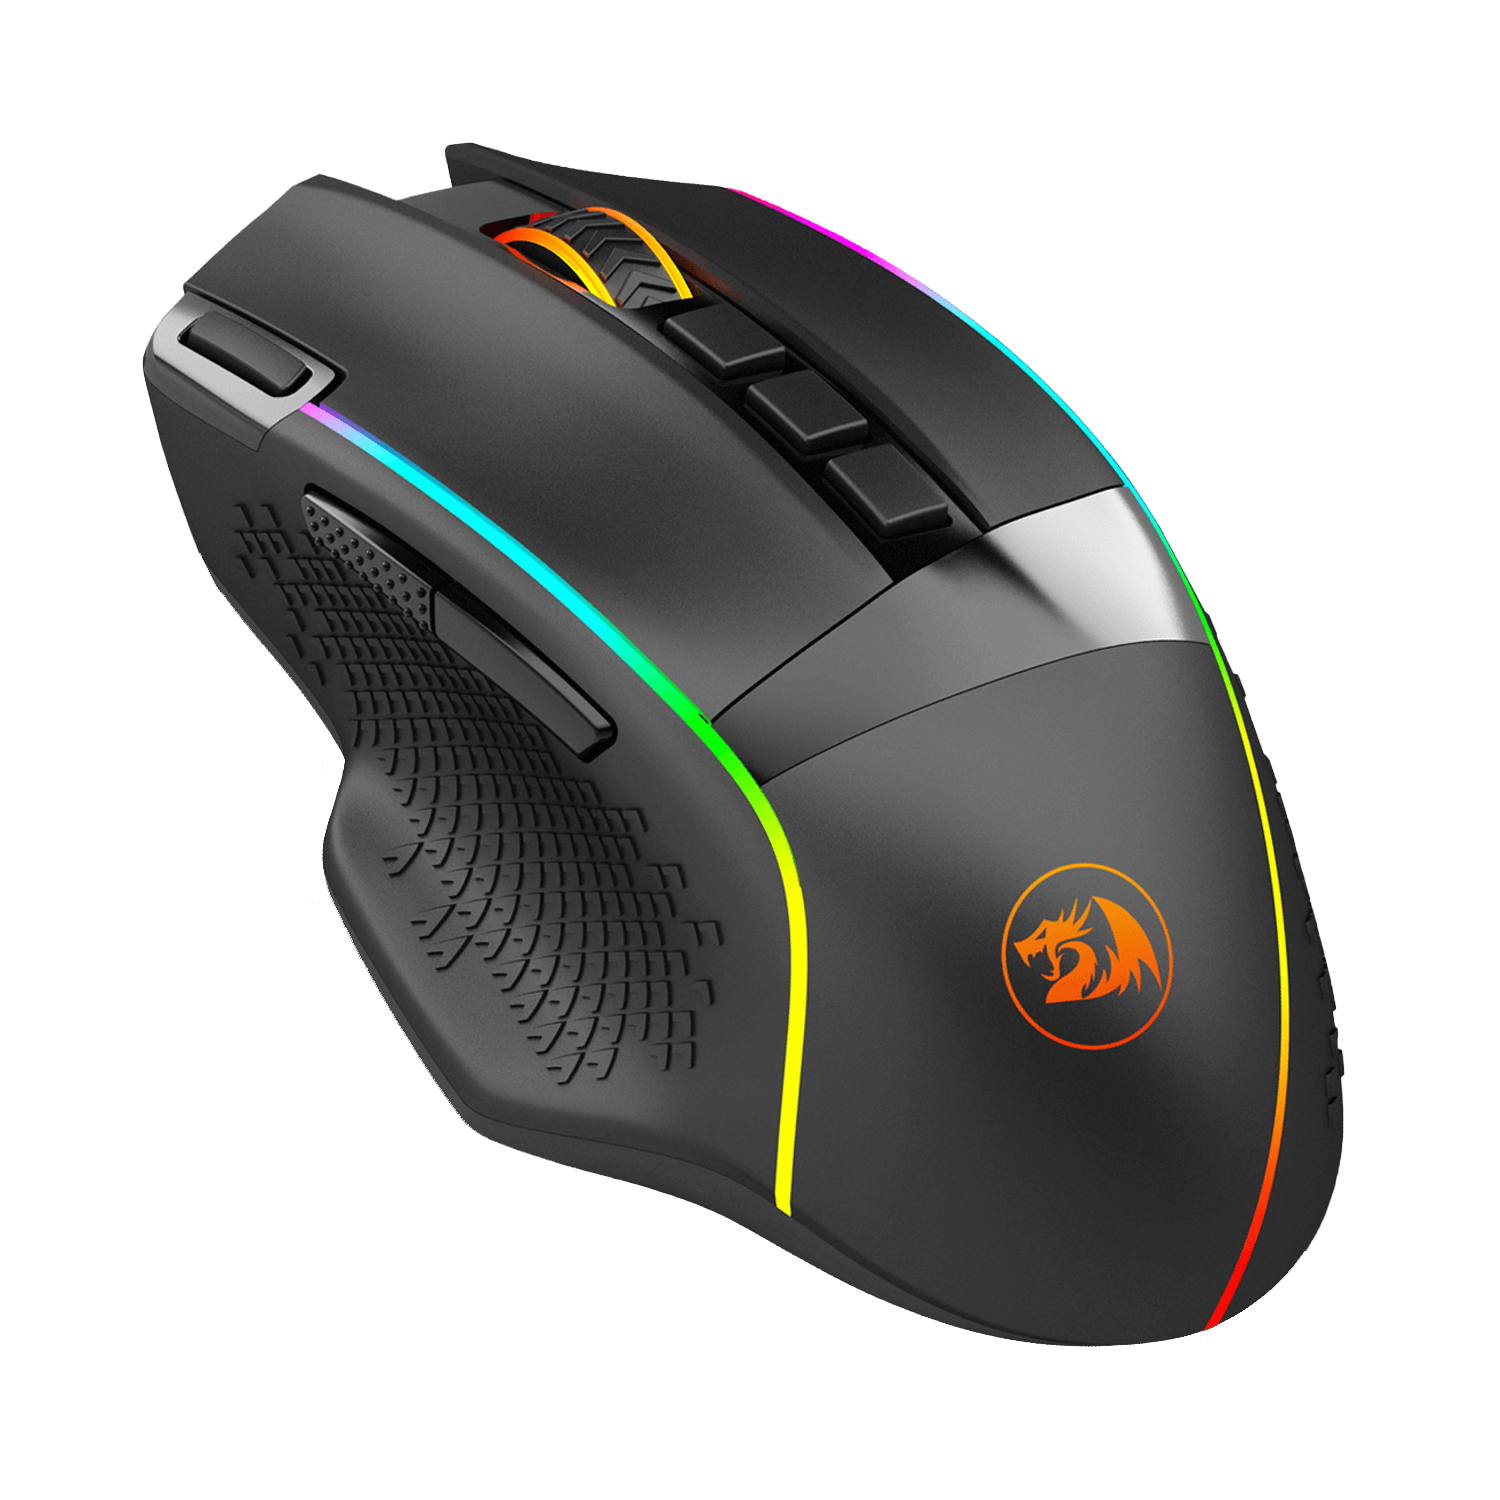 Wired/Wireless Gamer Mouse w/ Rapid Fire Key